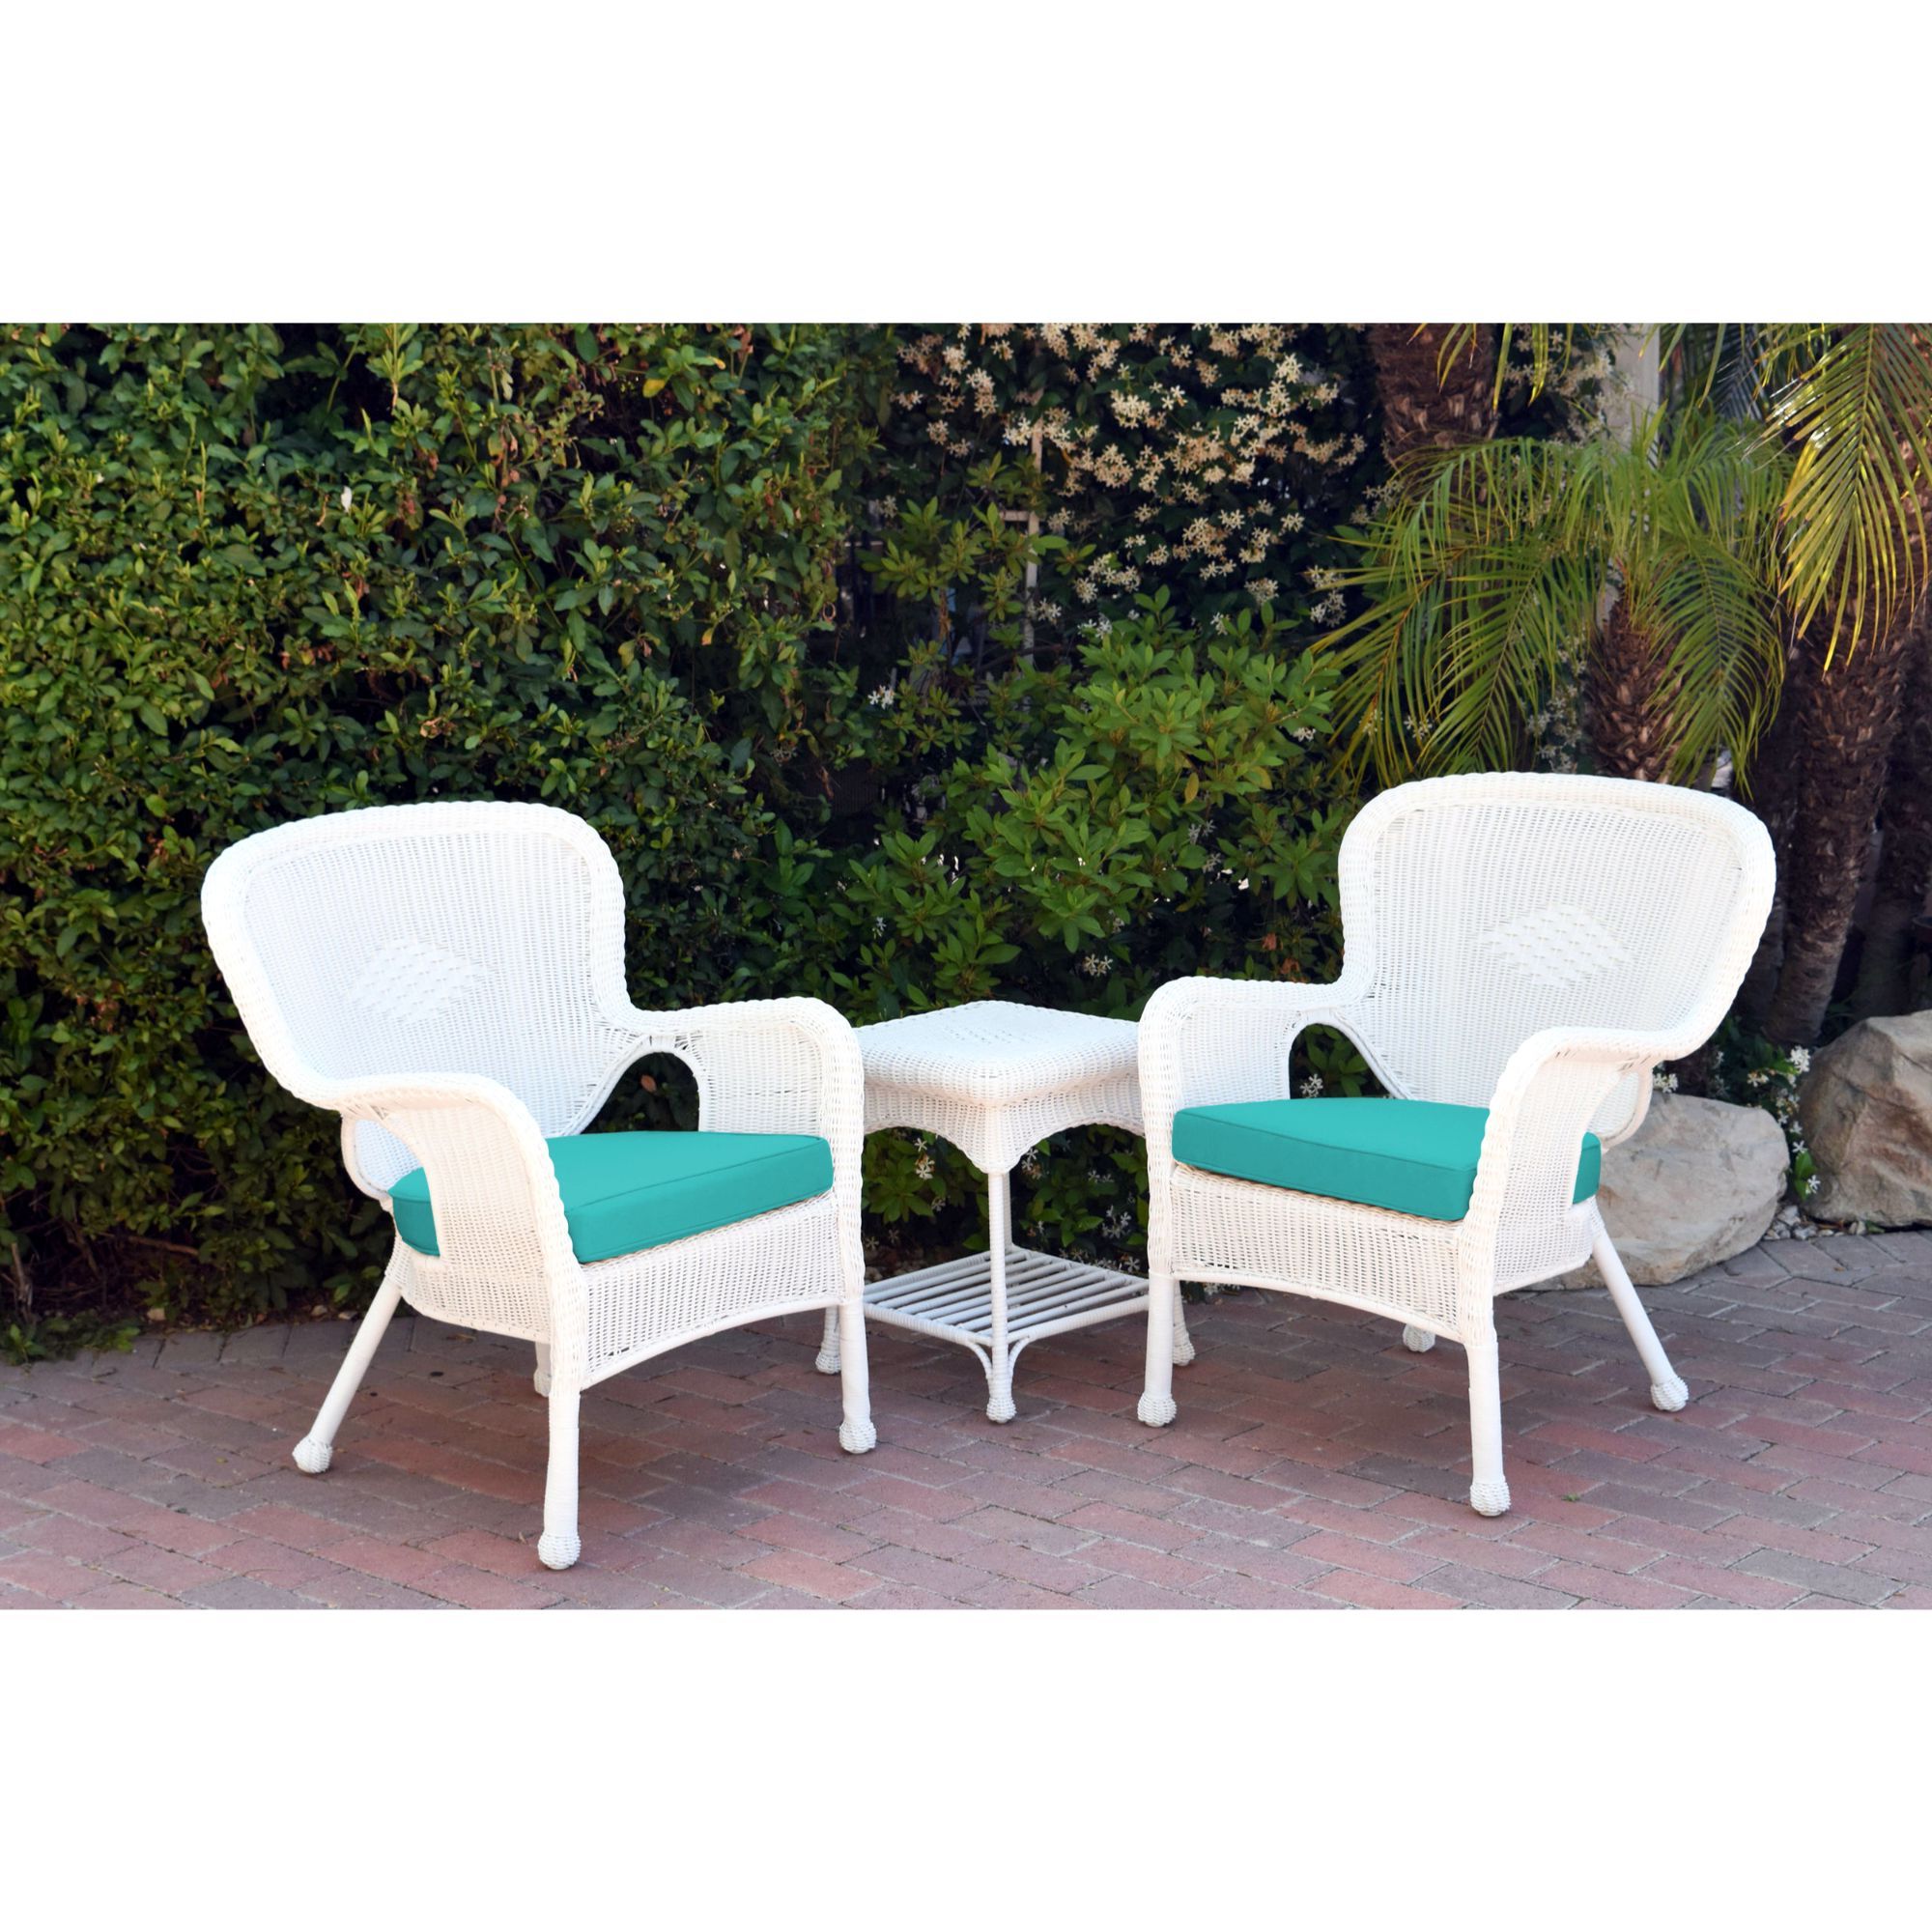 Preferred 3 Piece White Resin Wicker Outdoor Furniture Patio Conversation Set Pertaining To Green Rattan Outdoor Rocking Chair Sets (View 13 of 15)